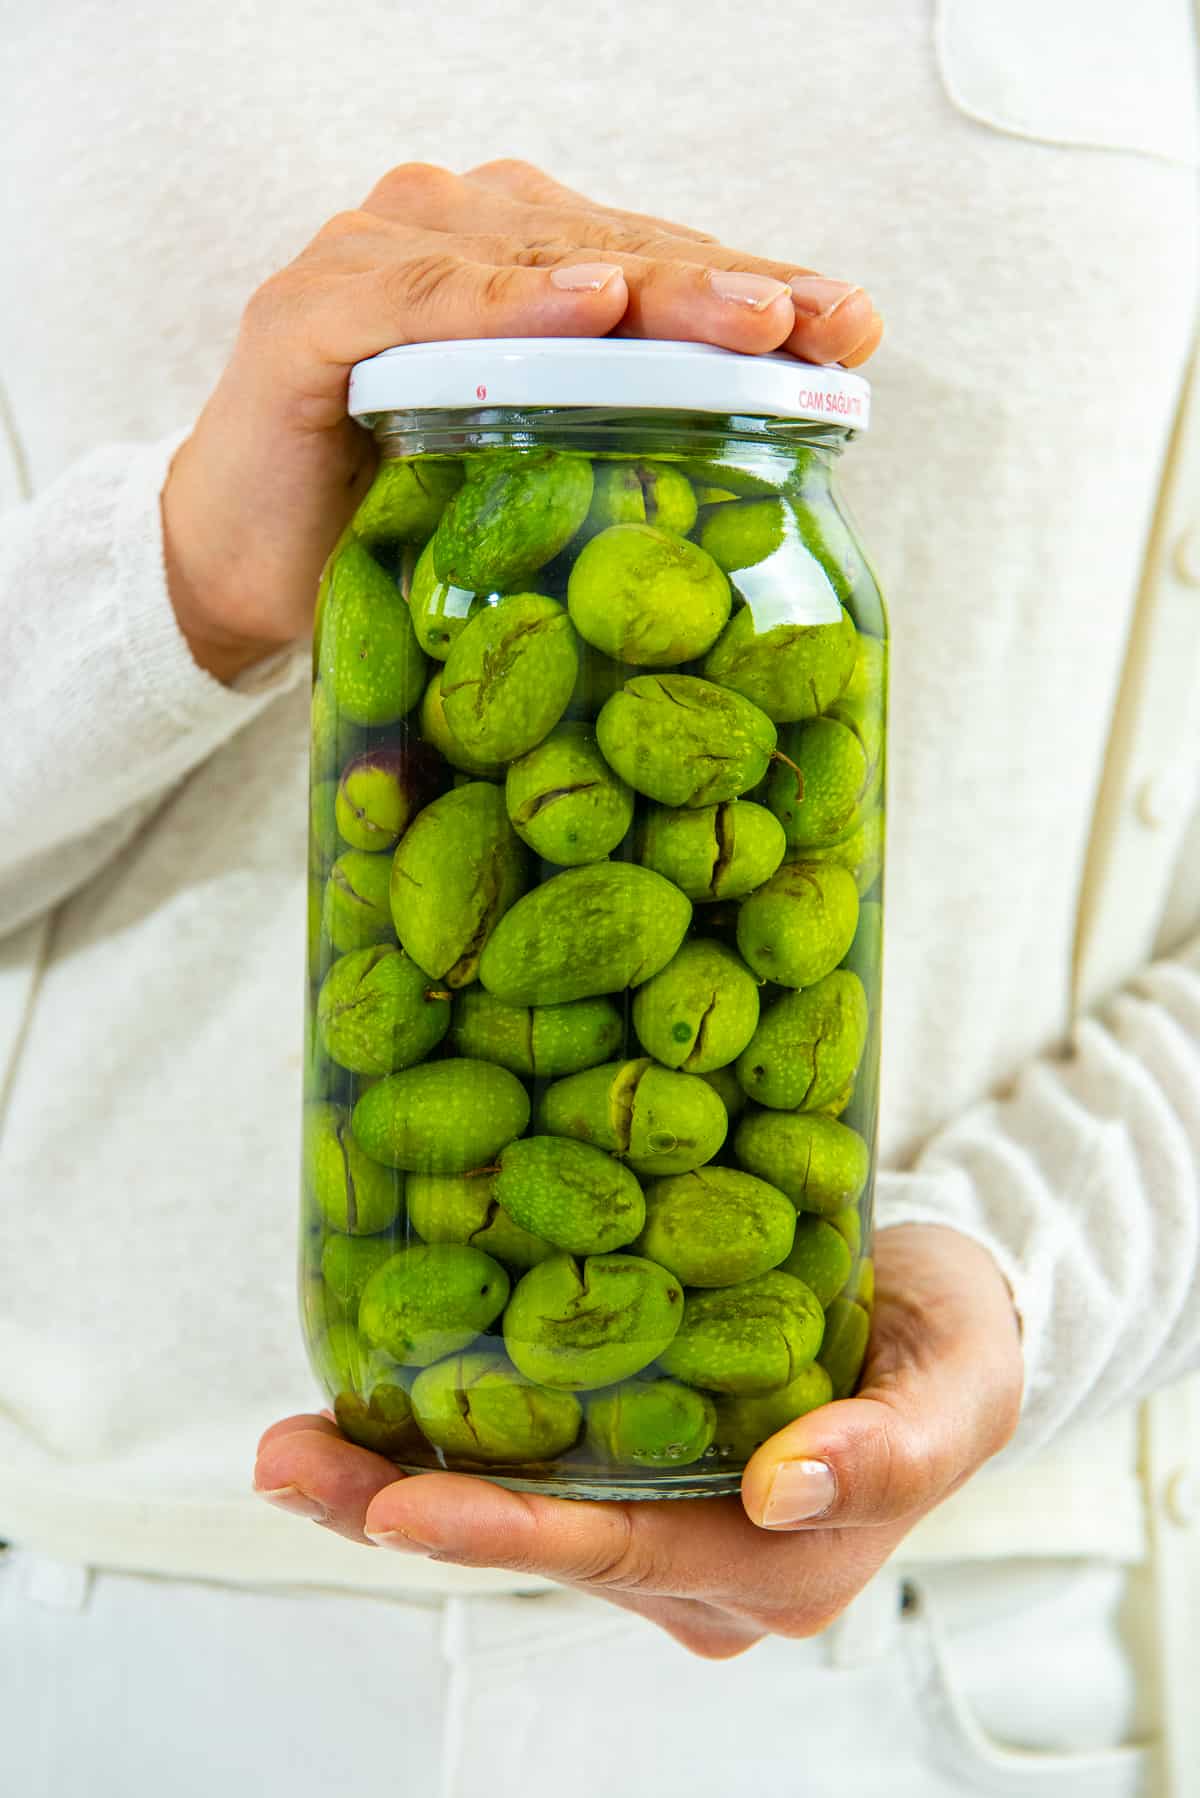 Woman holding a jar of green olives in her two hands.